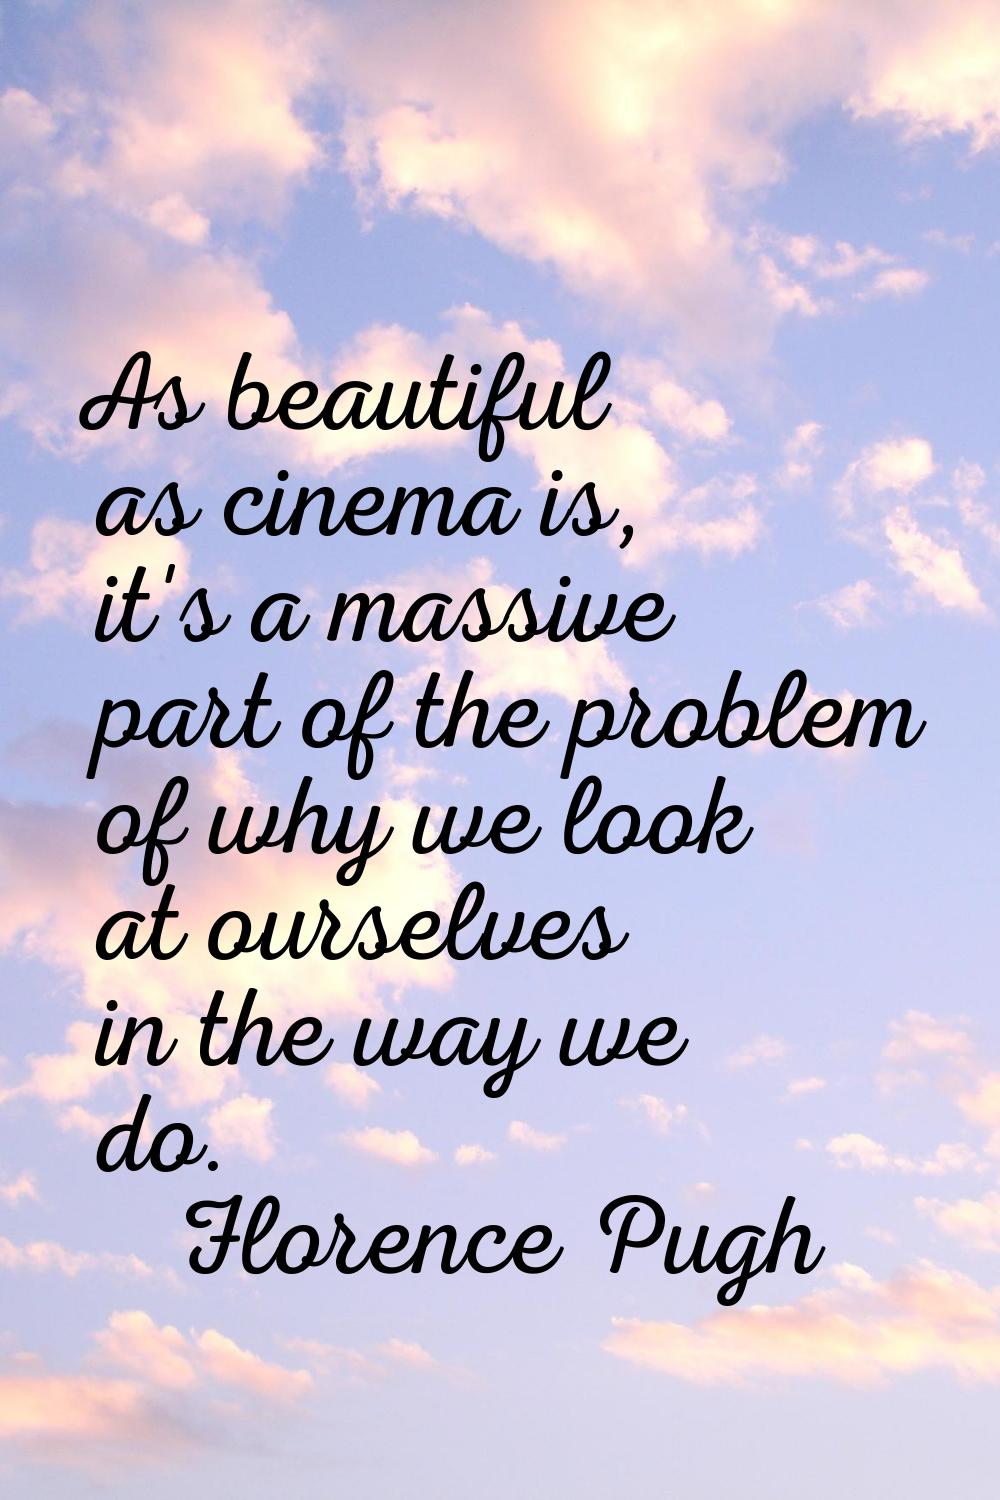 As beautiful as cinema is, it's a massive part of the problem of why we look at ourselves in the wa